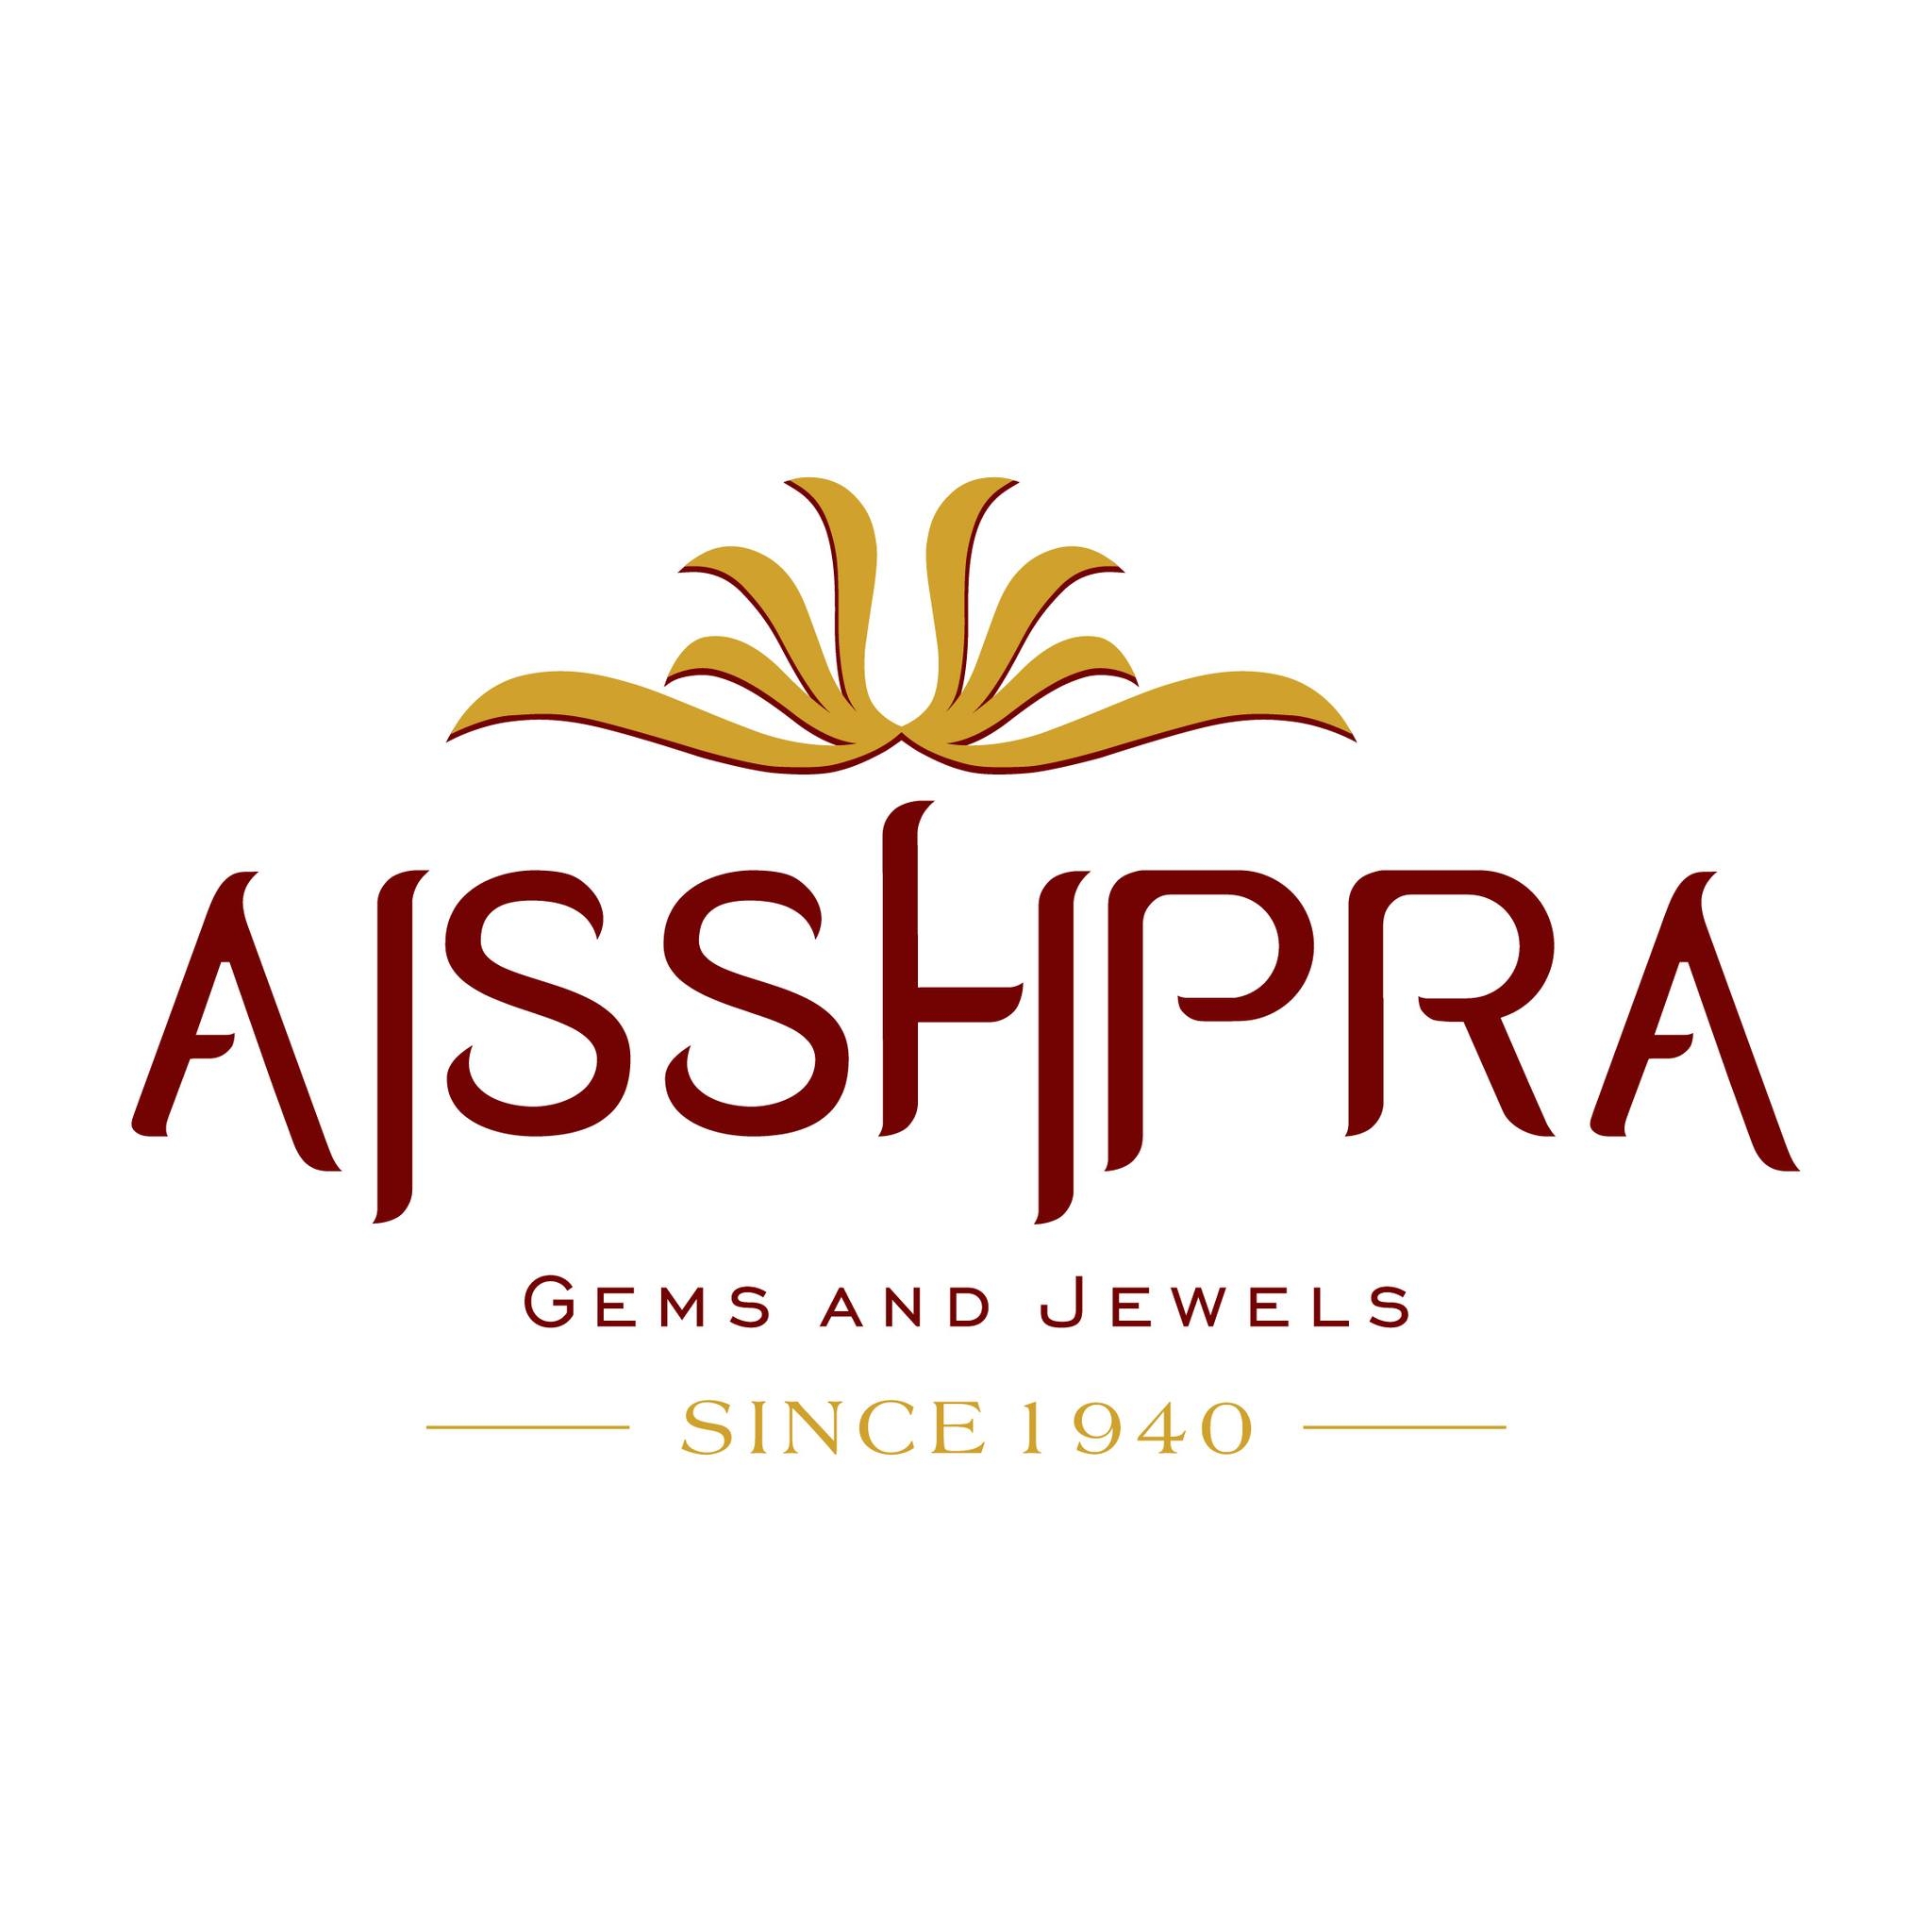 Aisshpra Gems and Jewels Unveils Special Jewellery Collection for Father's Day